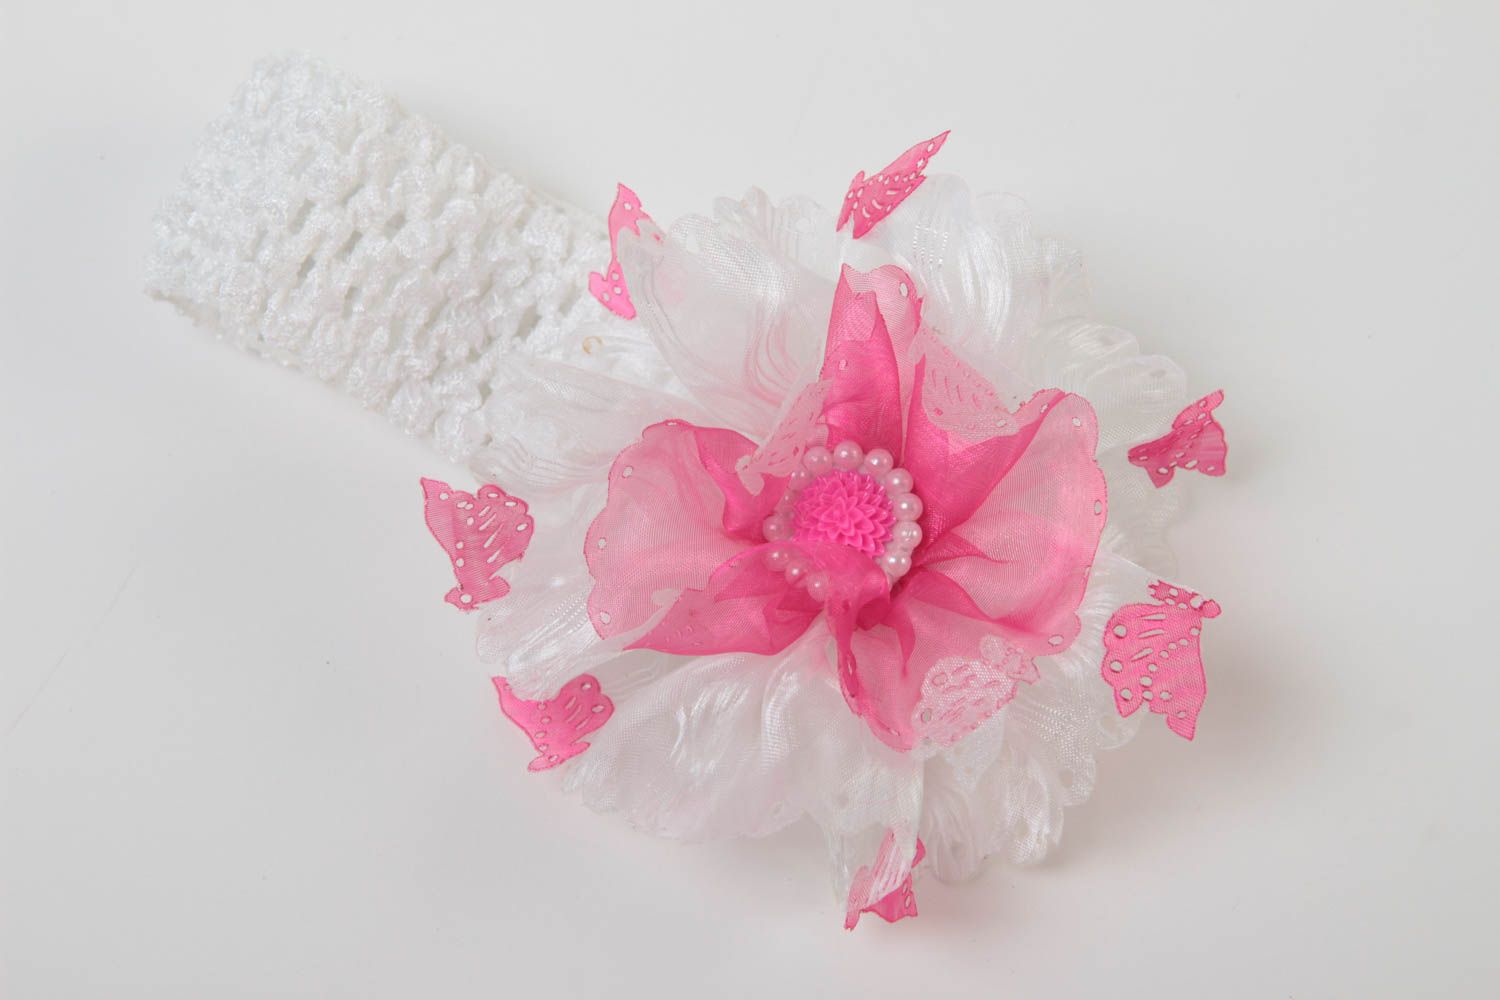 Gentle handmade textile flower headband flowers in hair gifts for her photo 2